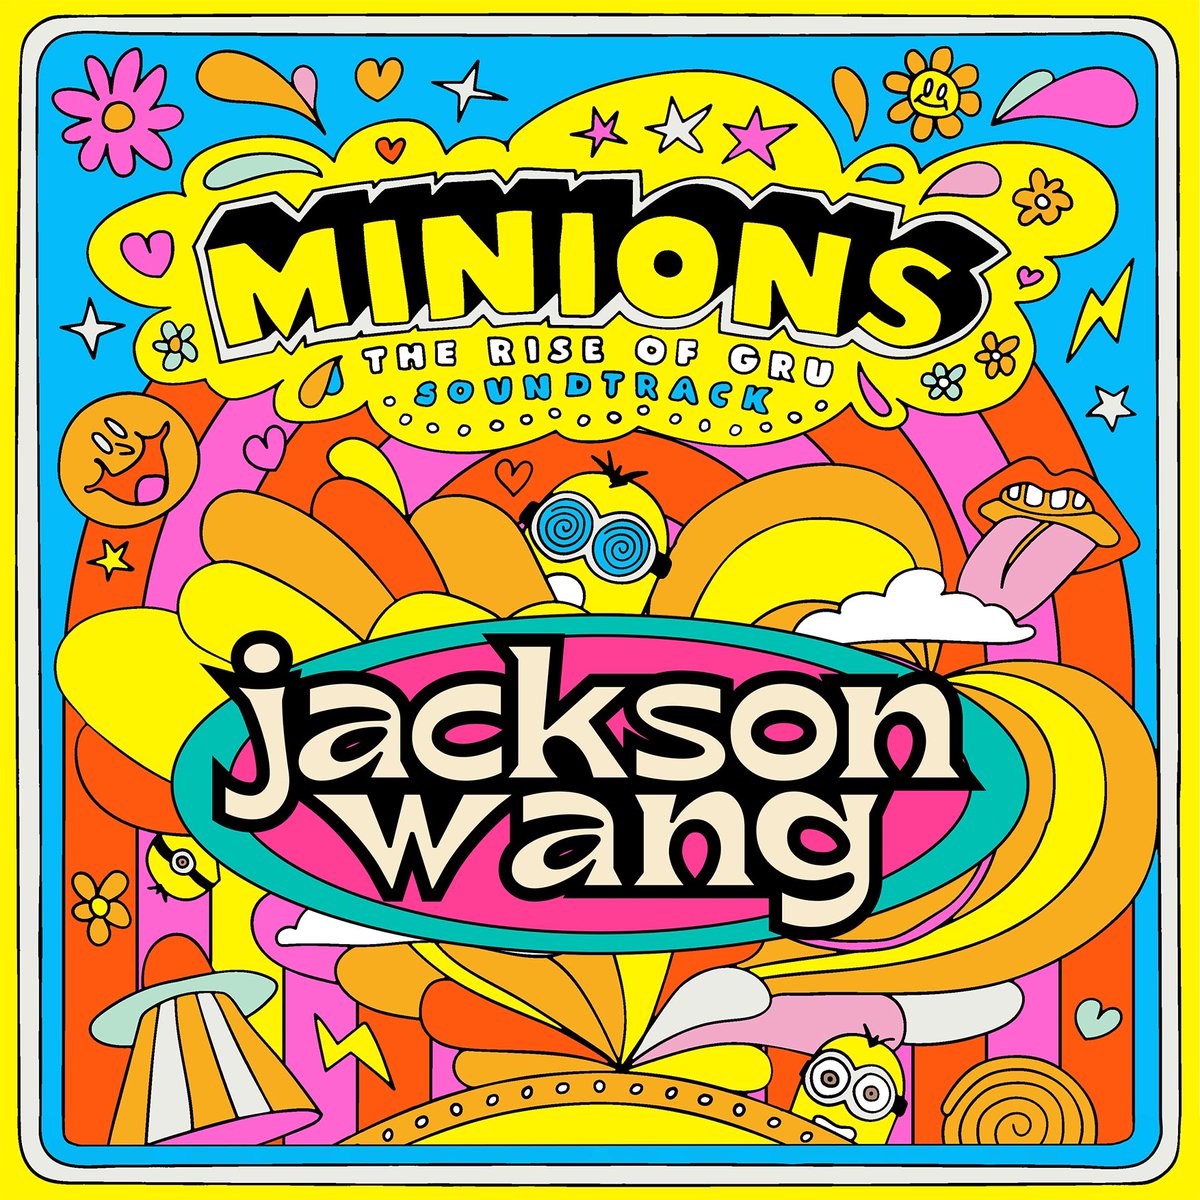 Jackson Wang will be on the Minions: The Rise of Gru Official Soundtrack.

It's coming 1st of July!

@JacksonWang852 
@Minions 

.
PRE-SAVE LINK👇
minions.lnk.to/OrderNowSo
.
#Minions
#TheRiseofGru
#jacksonwang 
#잭슨 
#王嘉爾
#TEAMWANGrecords